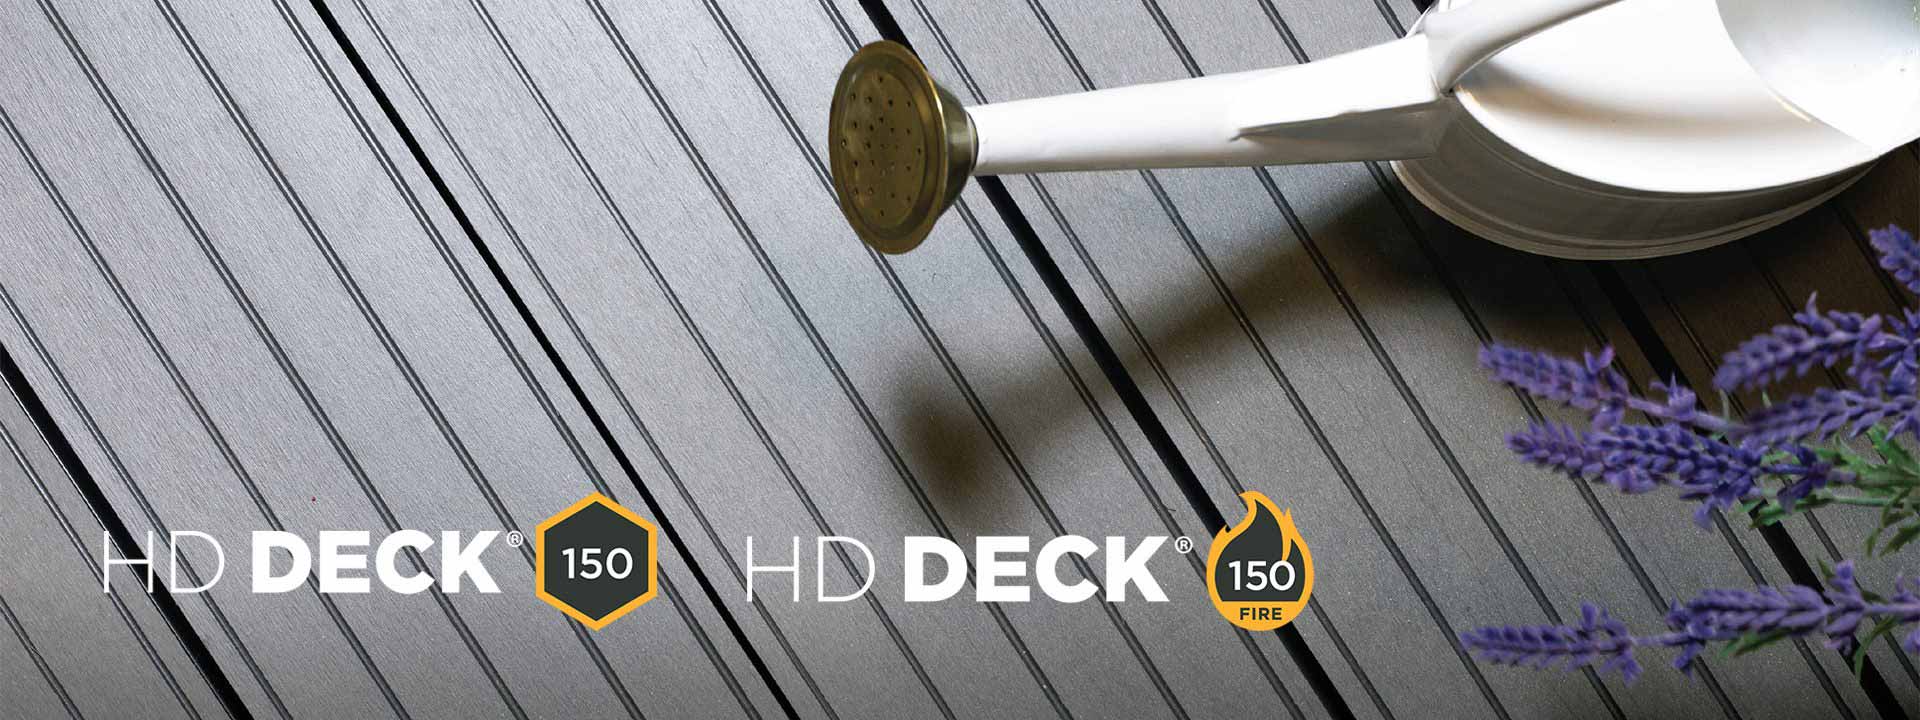 HD Deck 150 and 150 Fire, composite decking from Composite Prime